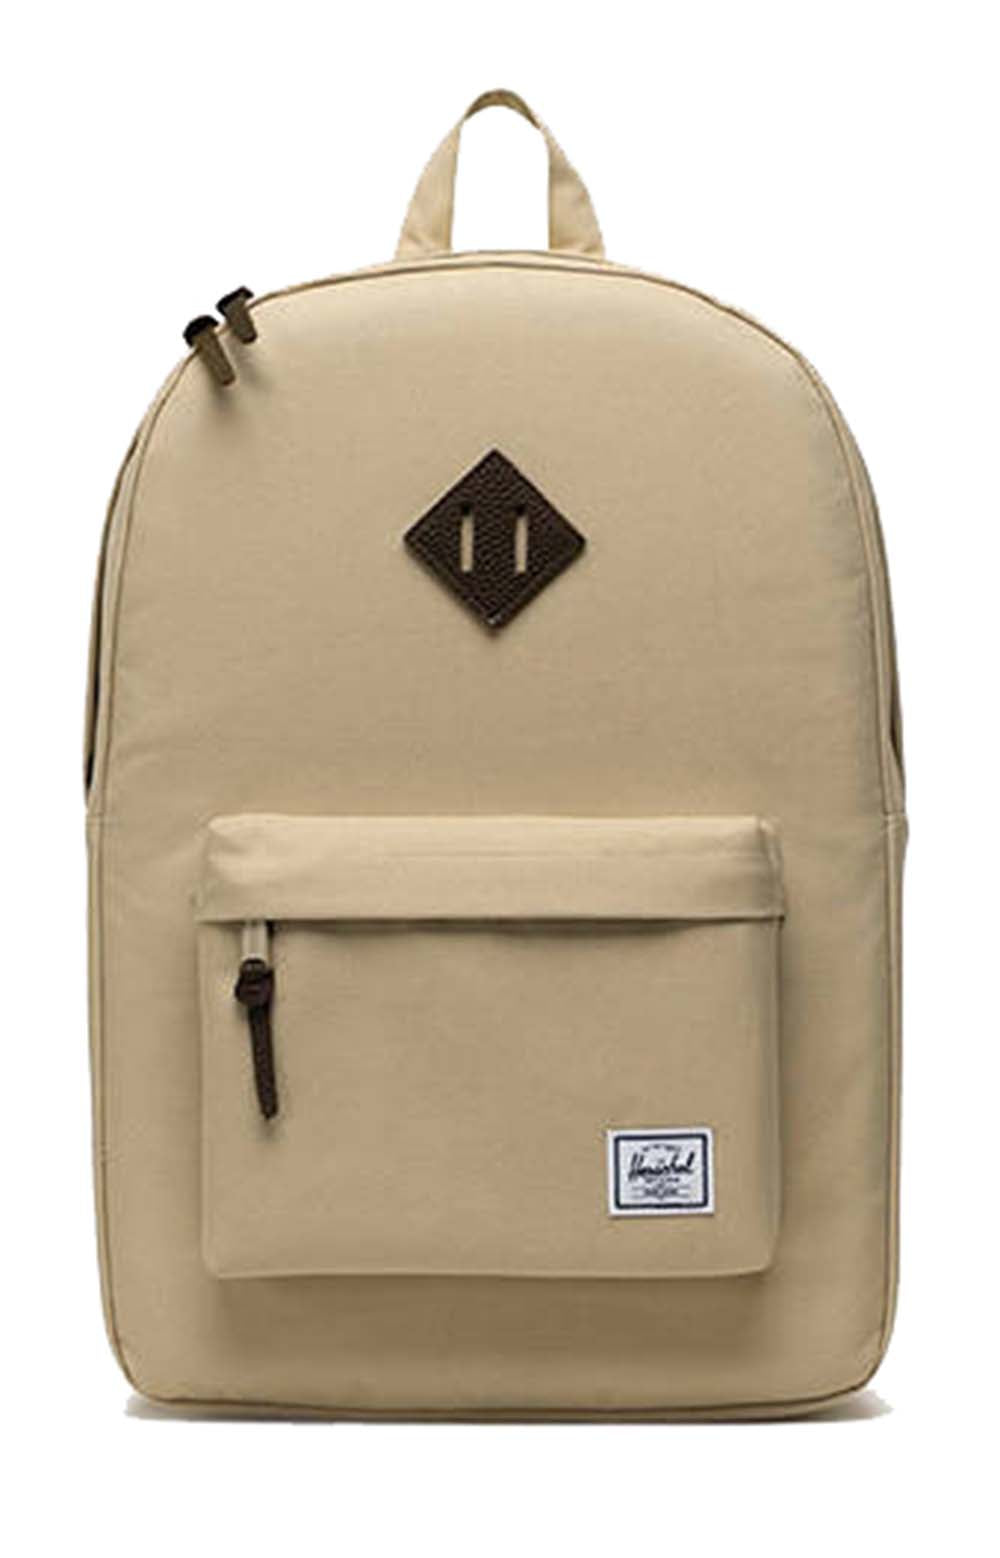 Heritage Backpack - Light Taupe/Chicory Coffee